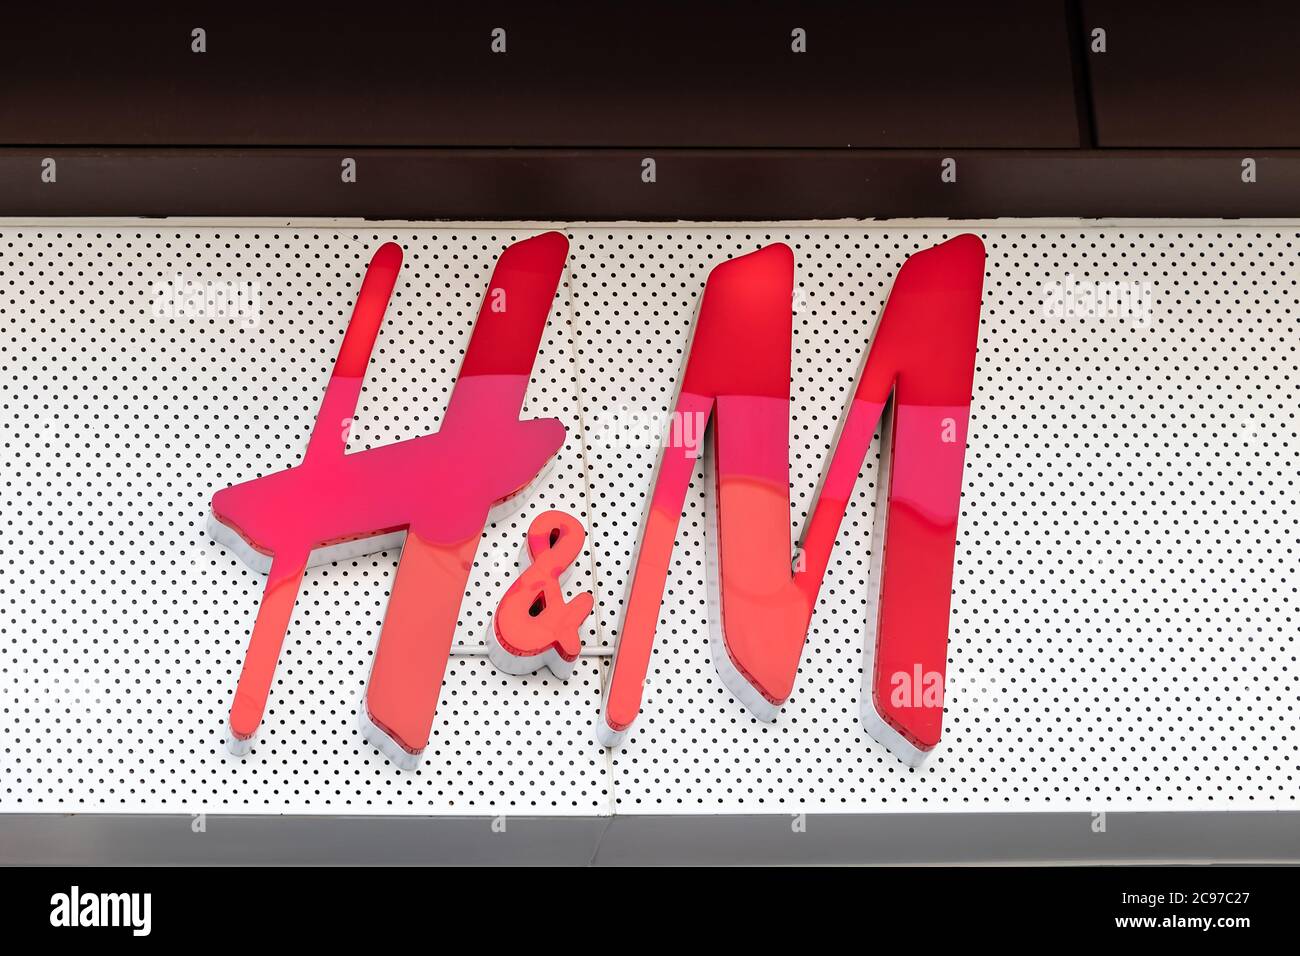 Huelva, Spain - July 27, 2020: H&M store logo above a store in Holea  Shopping center. H & M Hennes & Mauritz AB (H&M), is a Swedish clothing  company Stock Photo - Alamy